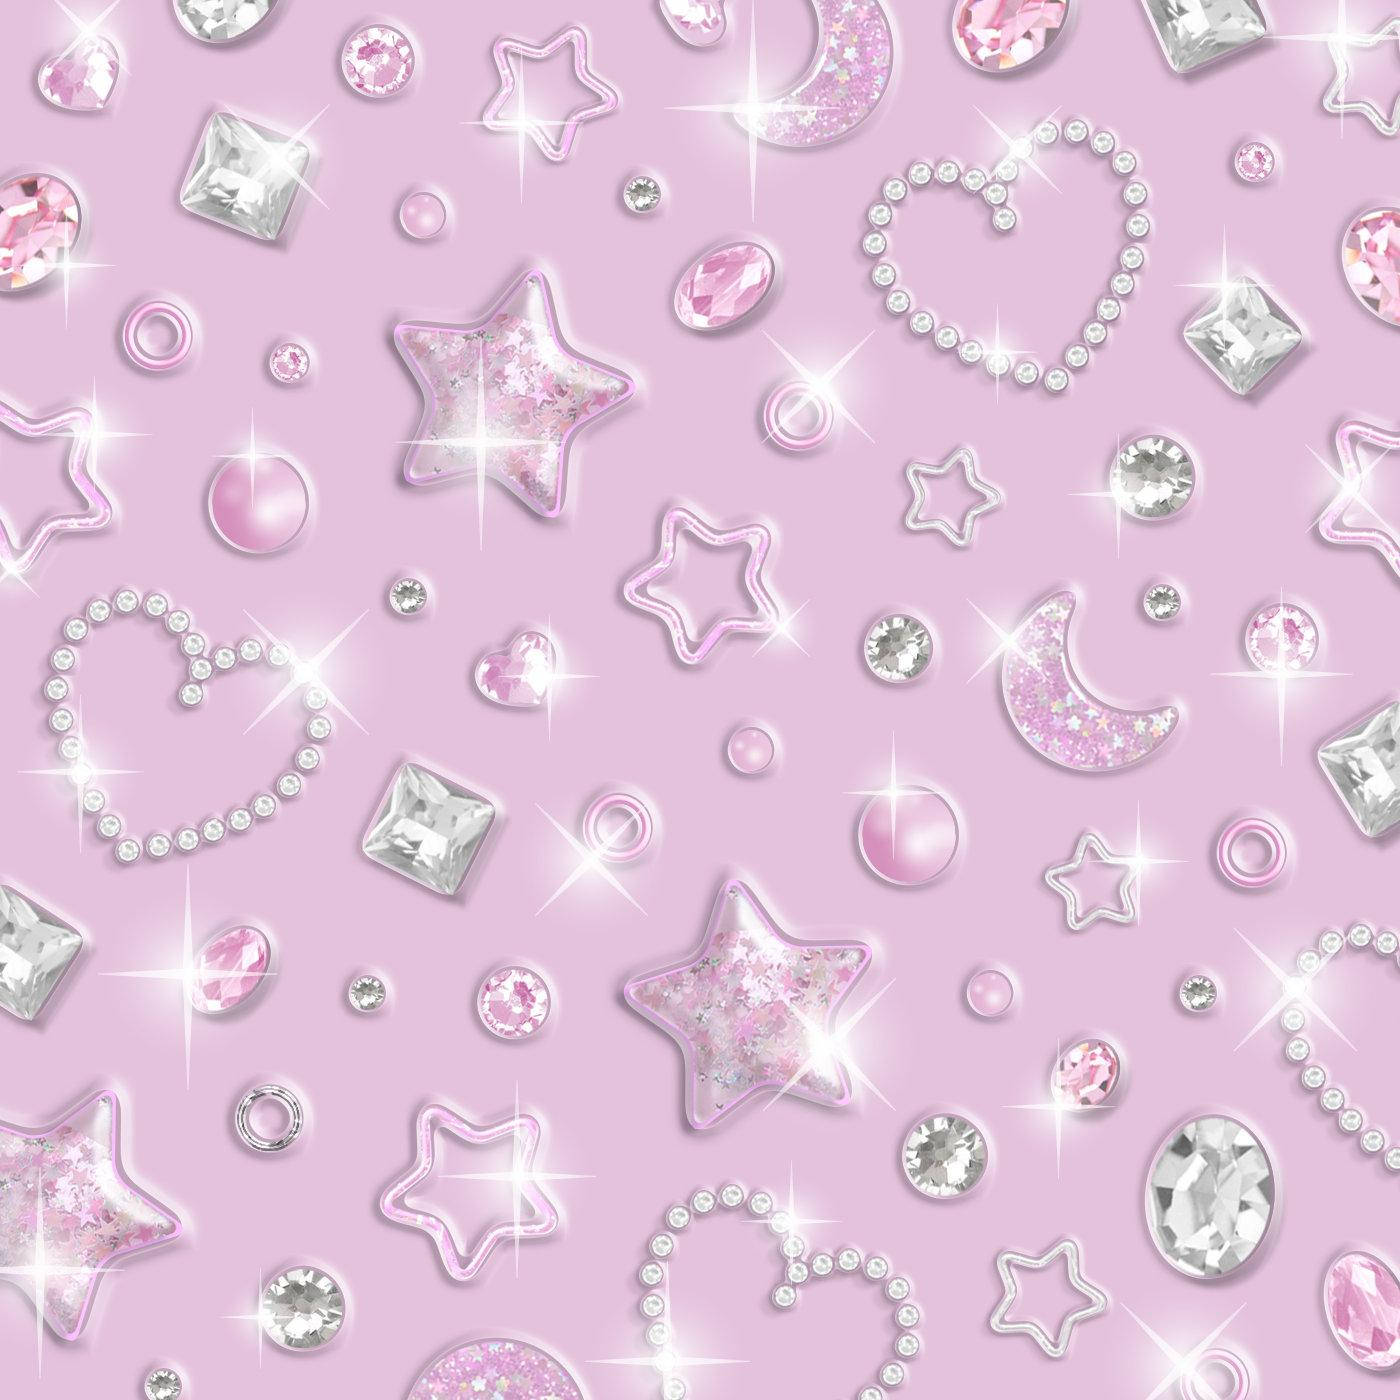 Y2k Aesthetic Diamonds And Pearls Background